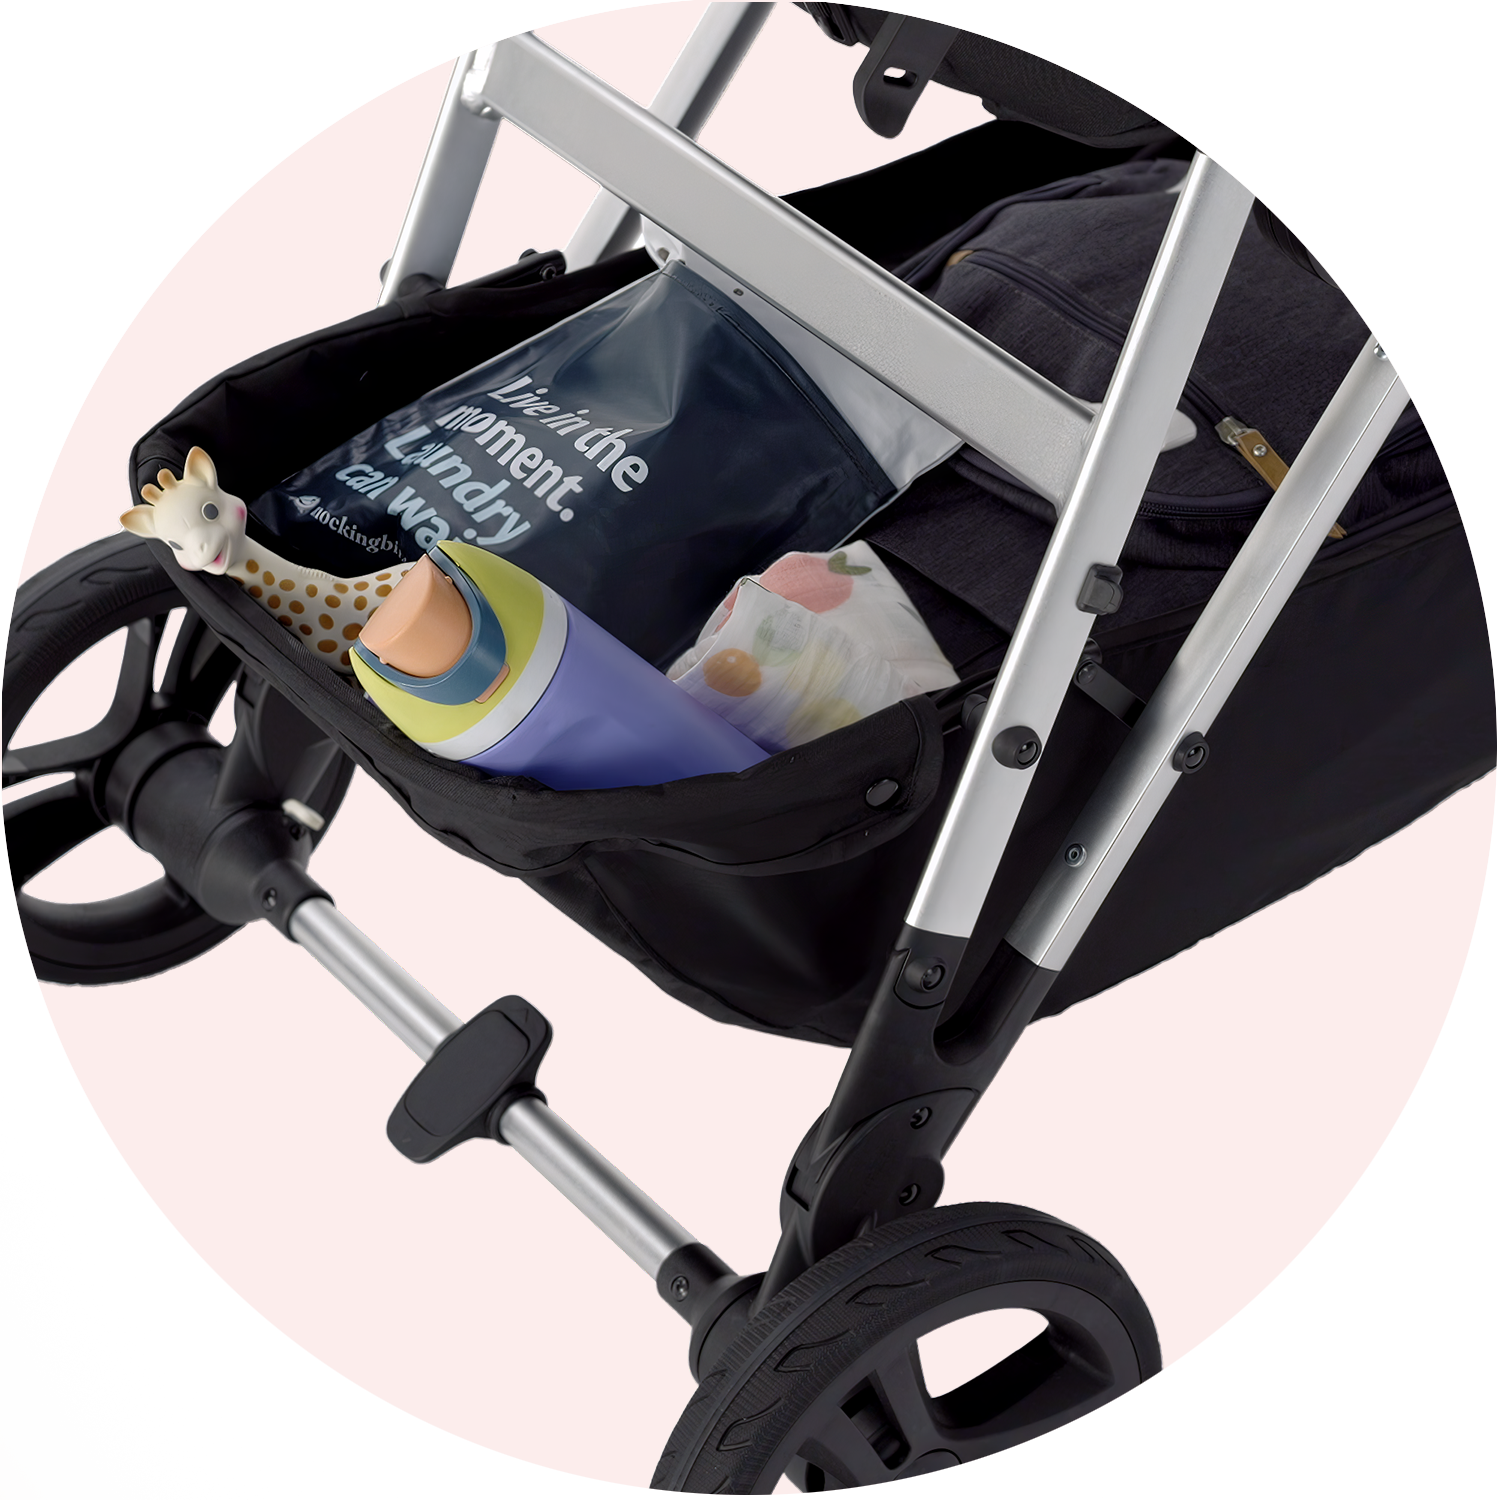 Close-up of a stroller's storage compartment holding a bag of baby snacks, a toy giraffe, and a baby bottle, against a pink background.